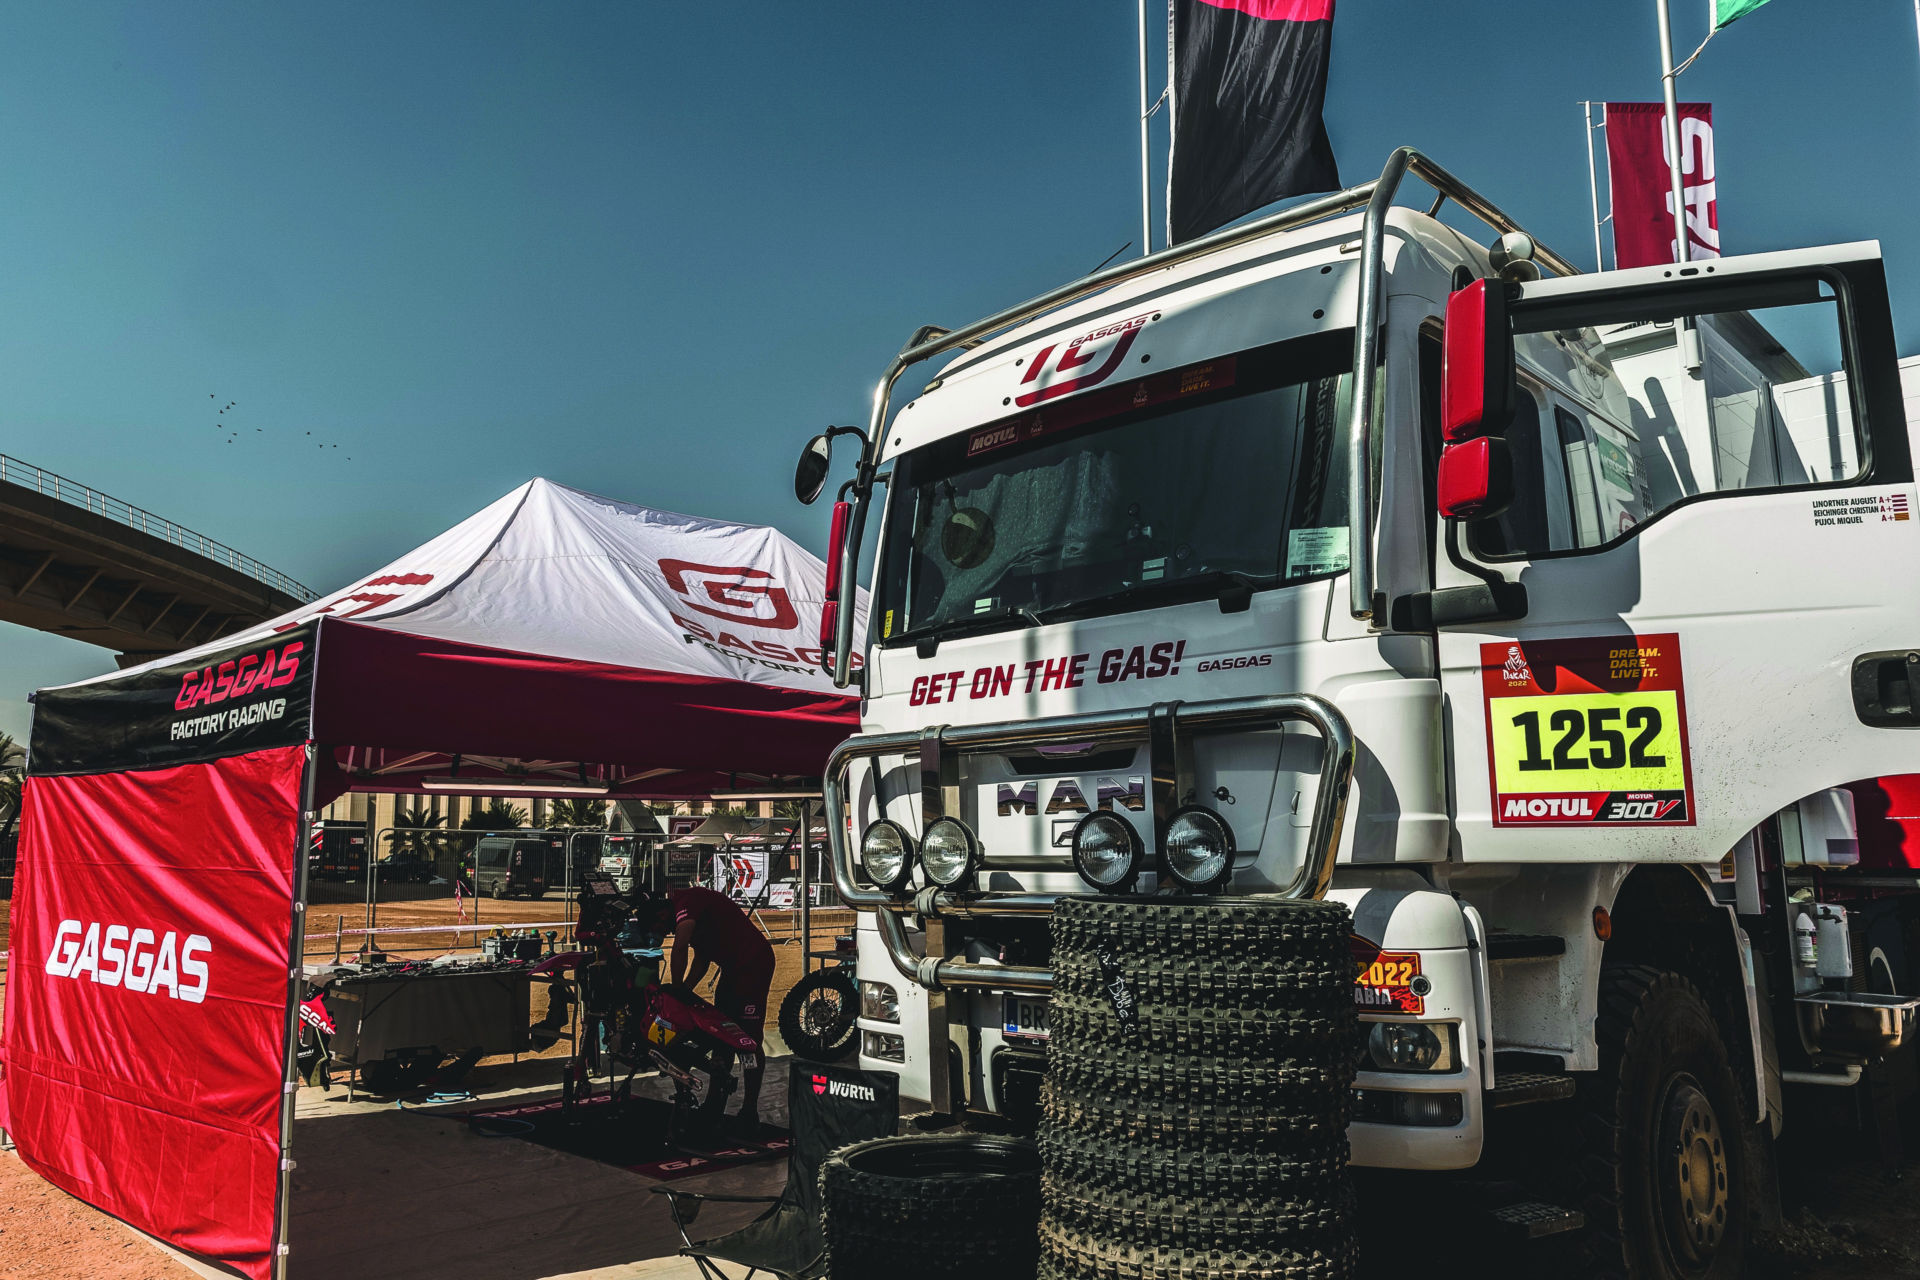 The GASGAS Factory Racing Team pit area at the Dakar Rally. Photo by Rally Zone, courtesy GASGAS Factory Racing.